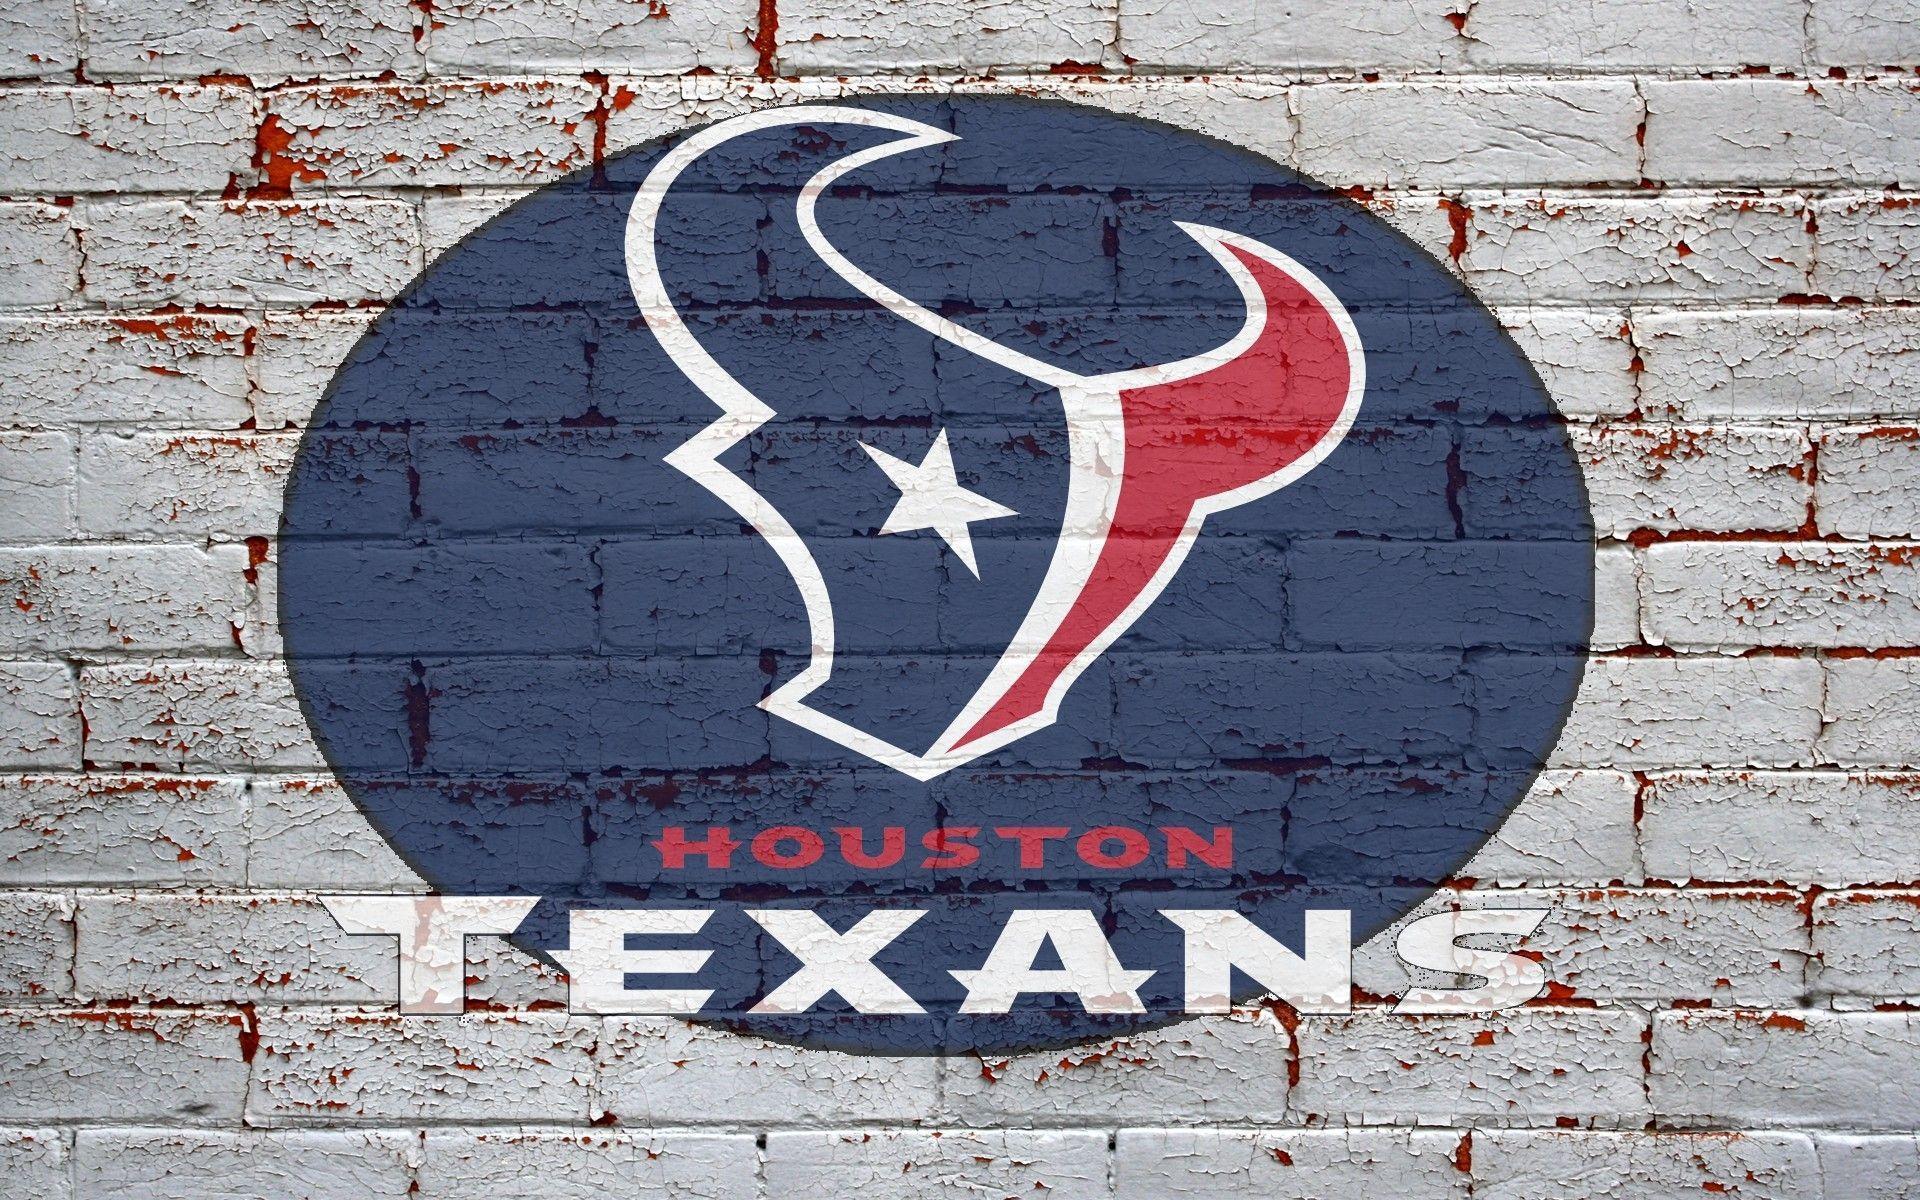 Houston Texans pictures hd